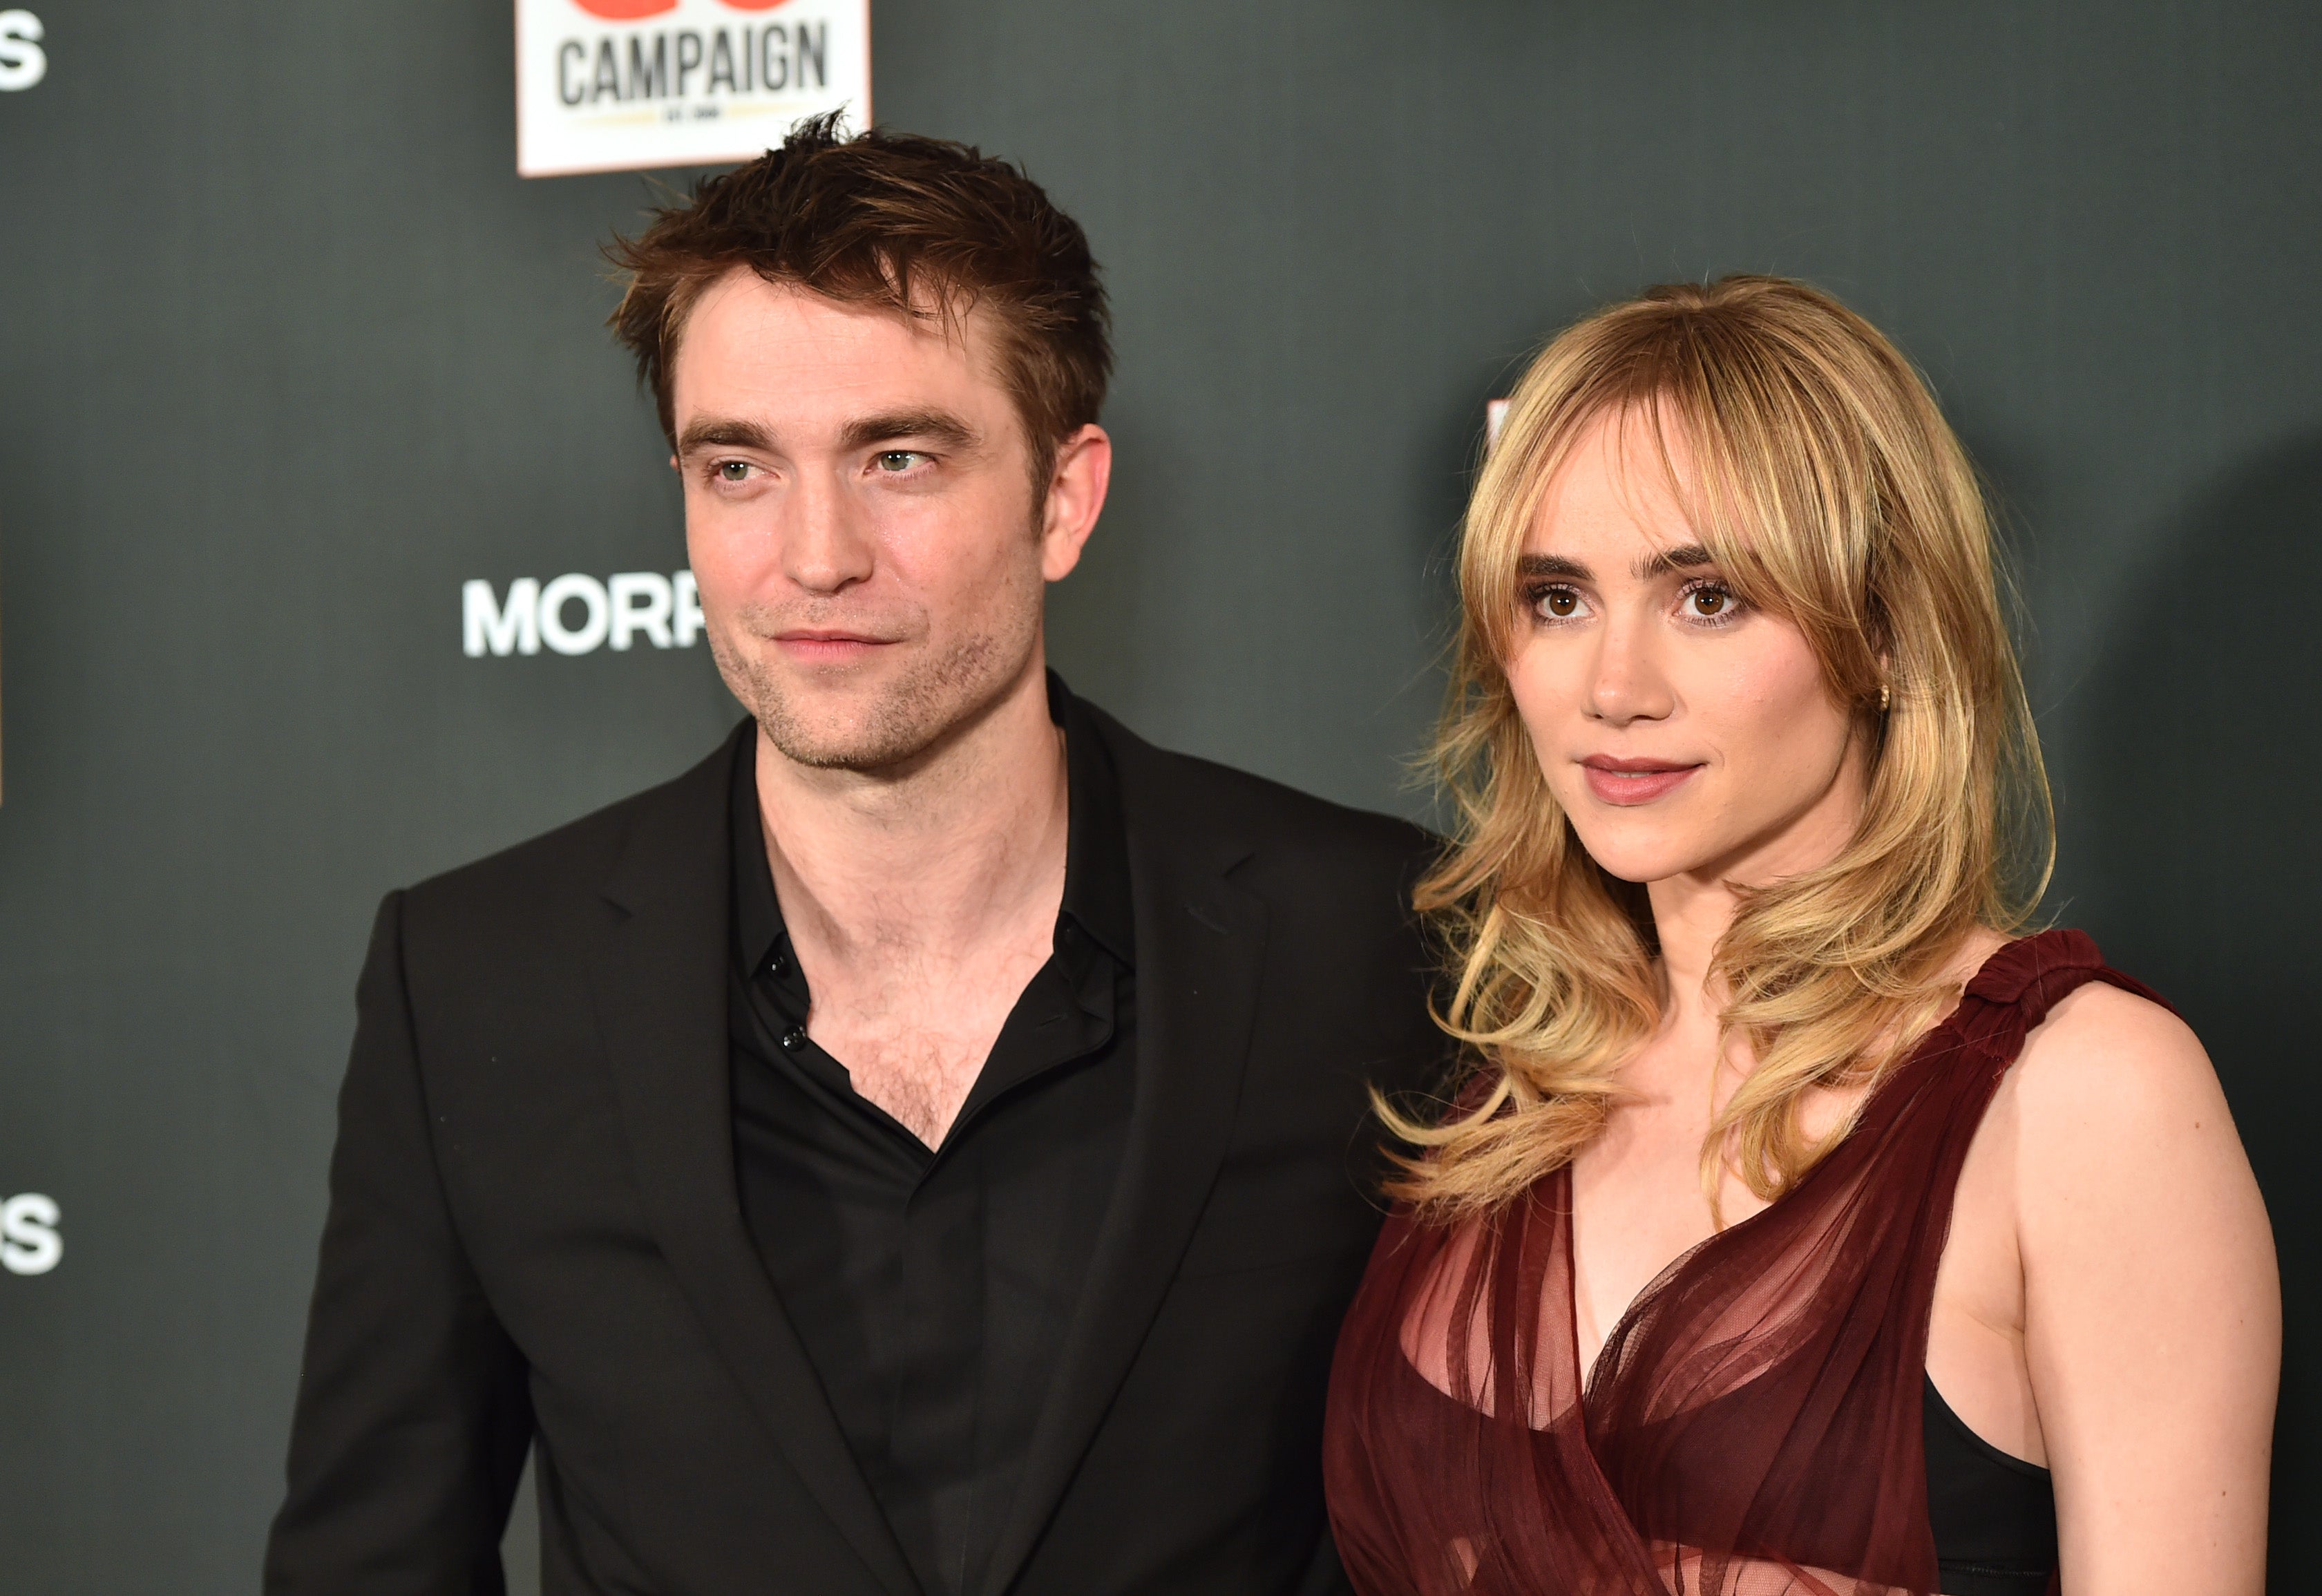 Pattinson and Waterhouse welcomed their son earlier this year.